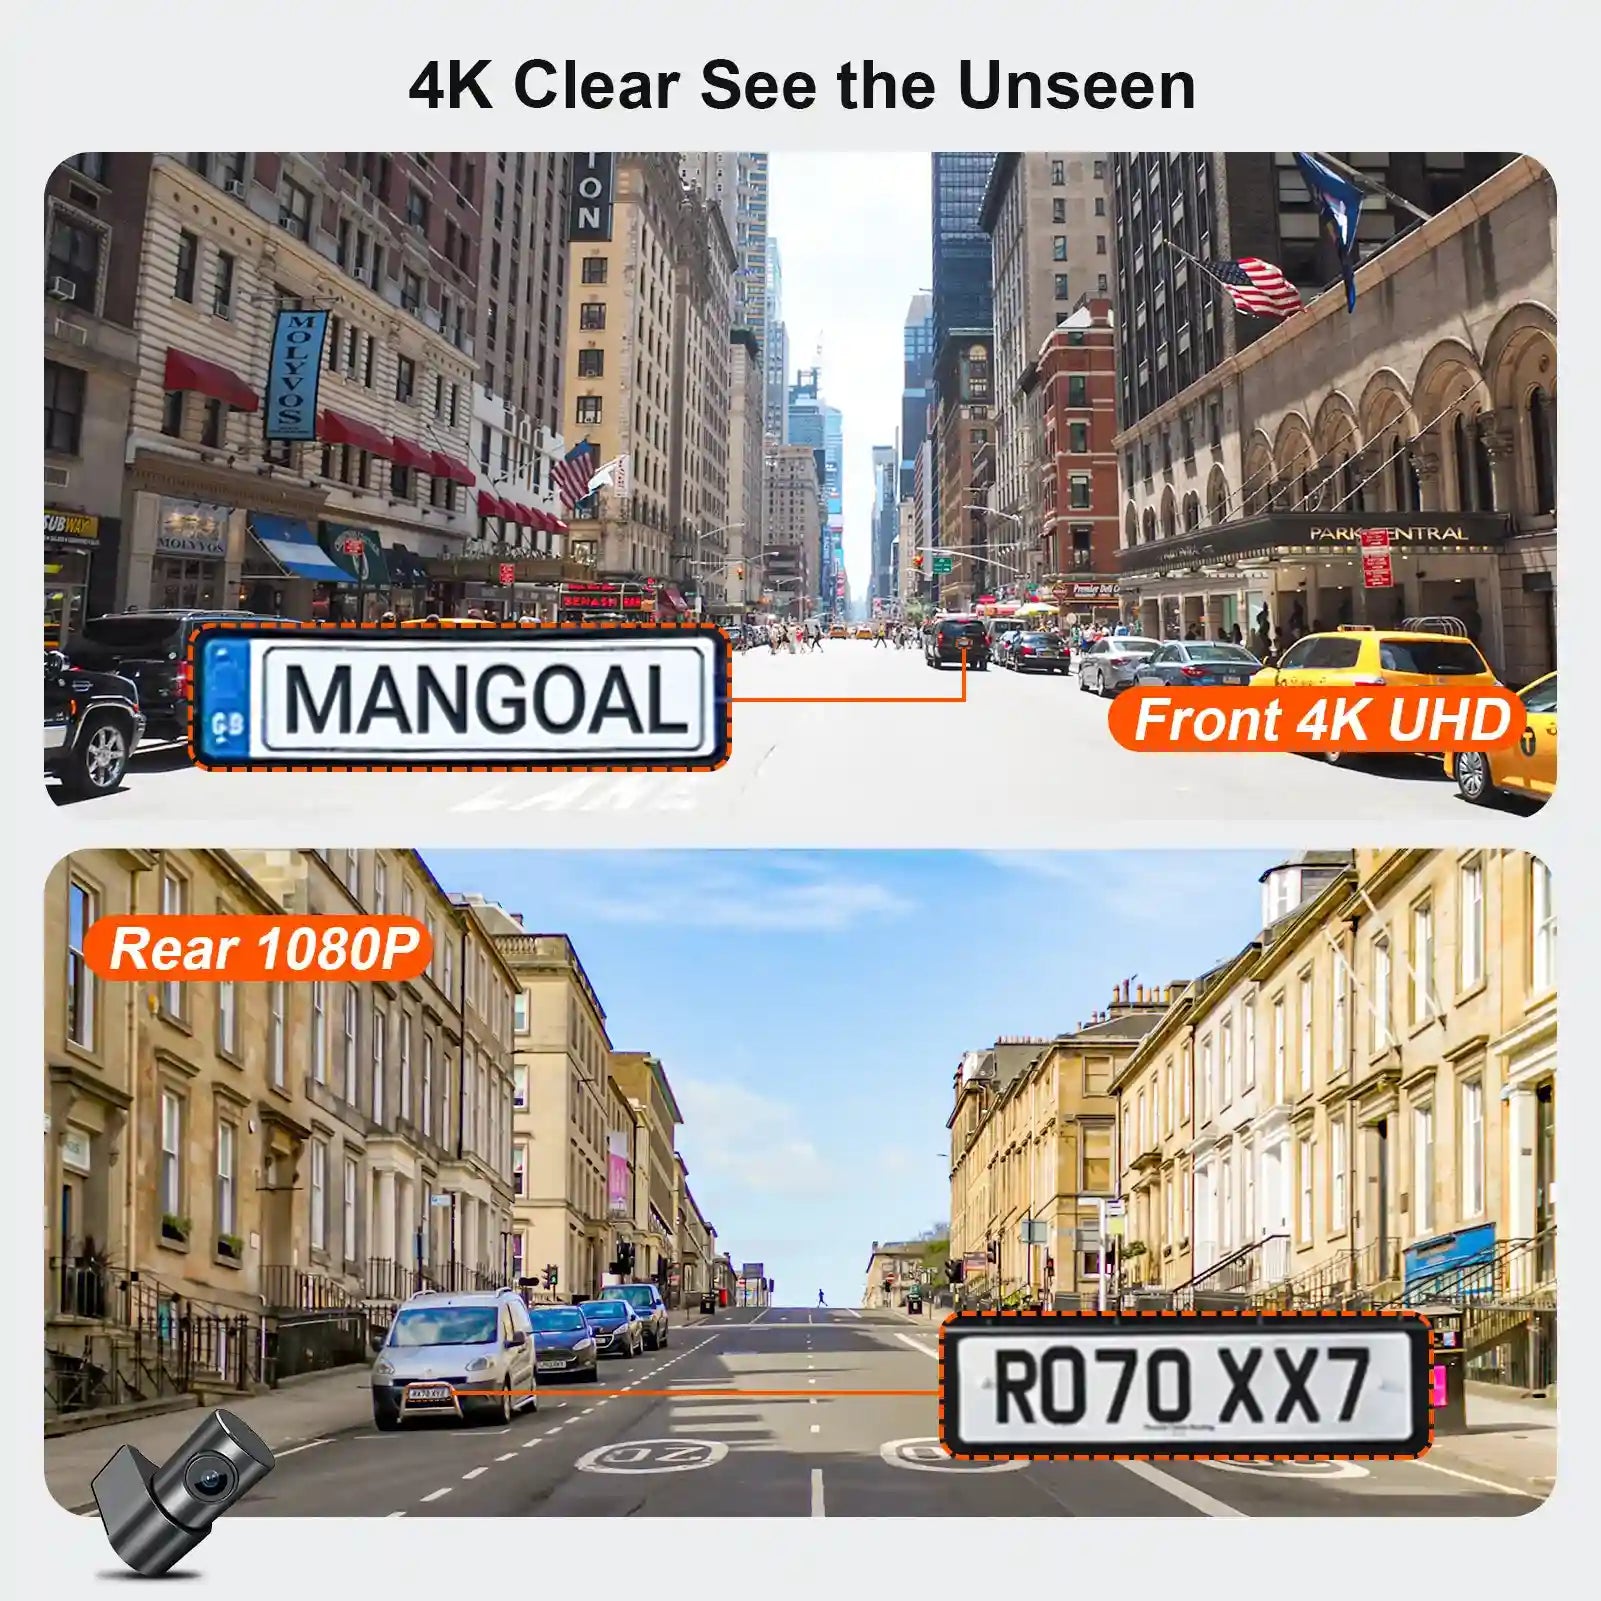 Mangoal Front 4K & Rear 1080P Dash Cam Fit for Jeep 5th Gen Cherokee 2014-2018 KL (Model B), Latitude Altitude Limited,UHD 2160P Video,OEM Look, Built-in WiFi,Easy to Install, Free App and 128GB Card